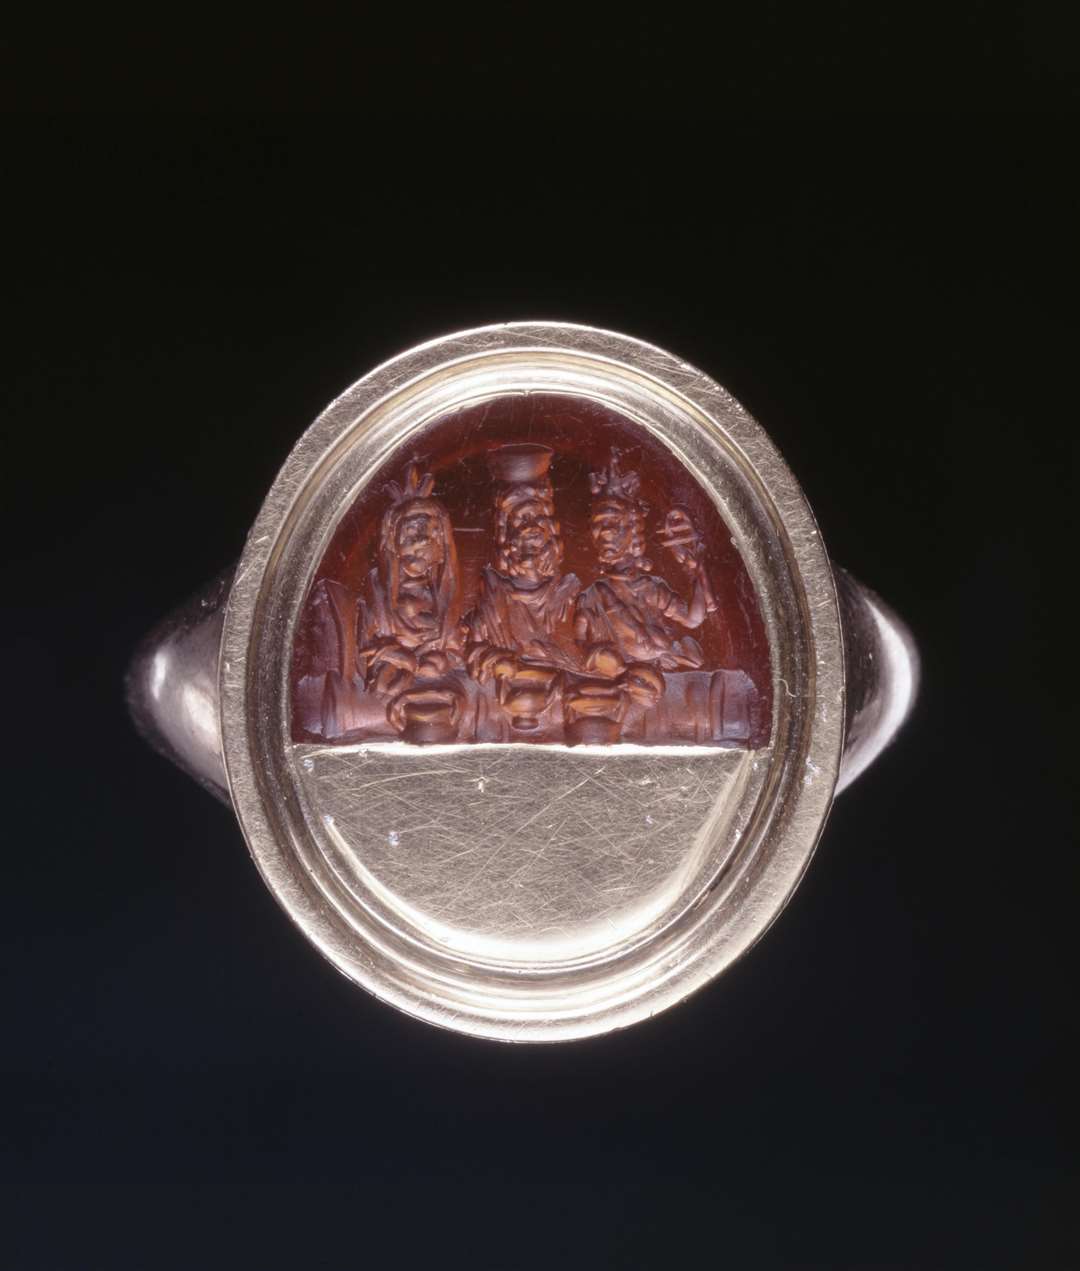 The upper part of a sard gem engraved with Sarapis wearing a calatho, 1st-3rd century AD, similar to the items missing. (The Trustees of the British Museum/PA)